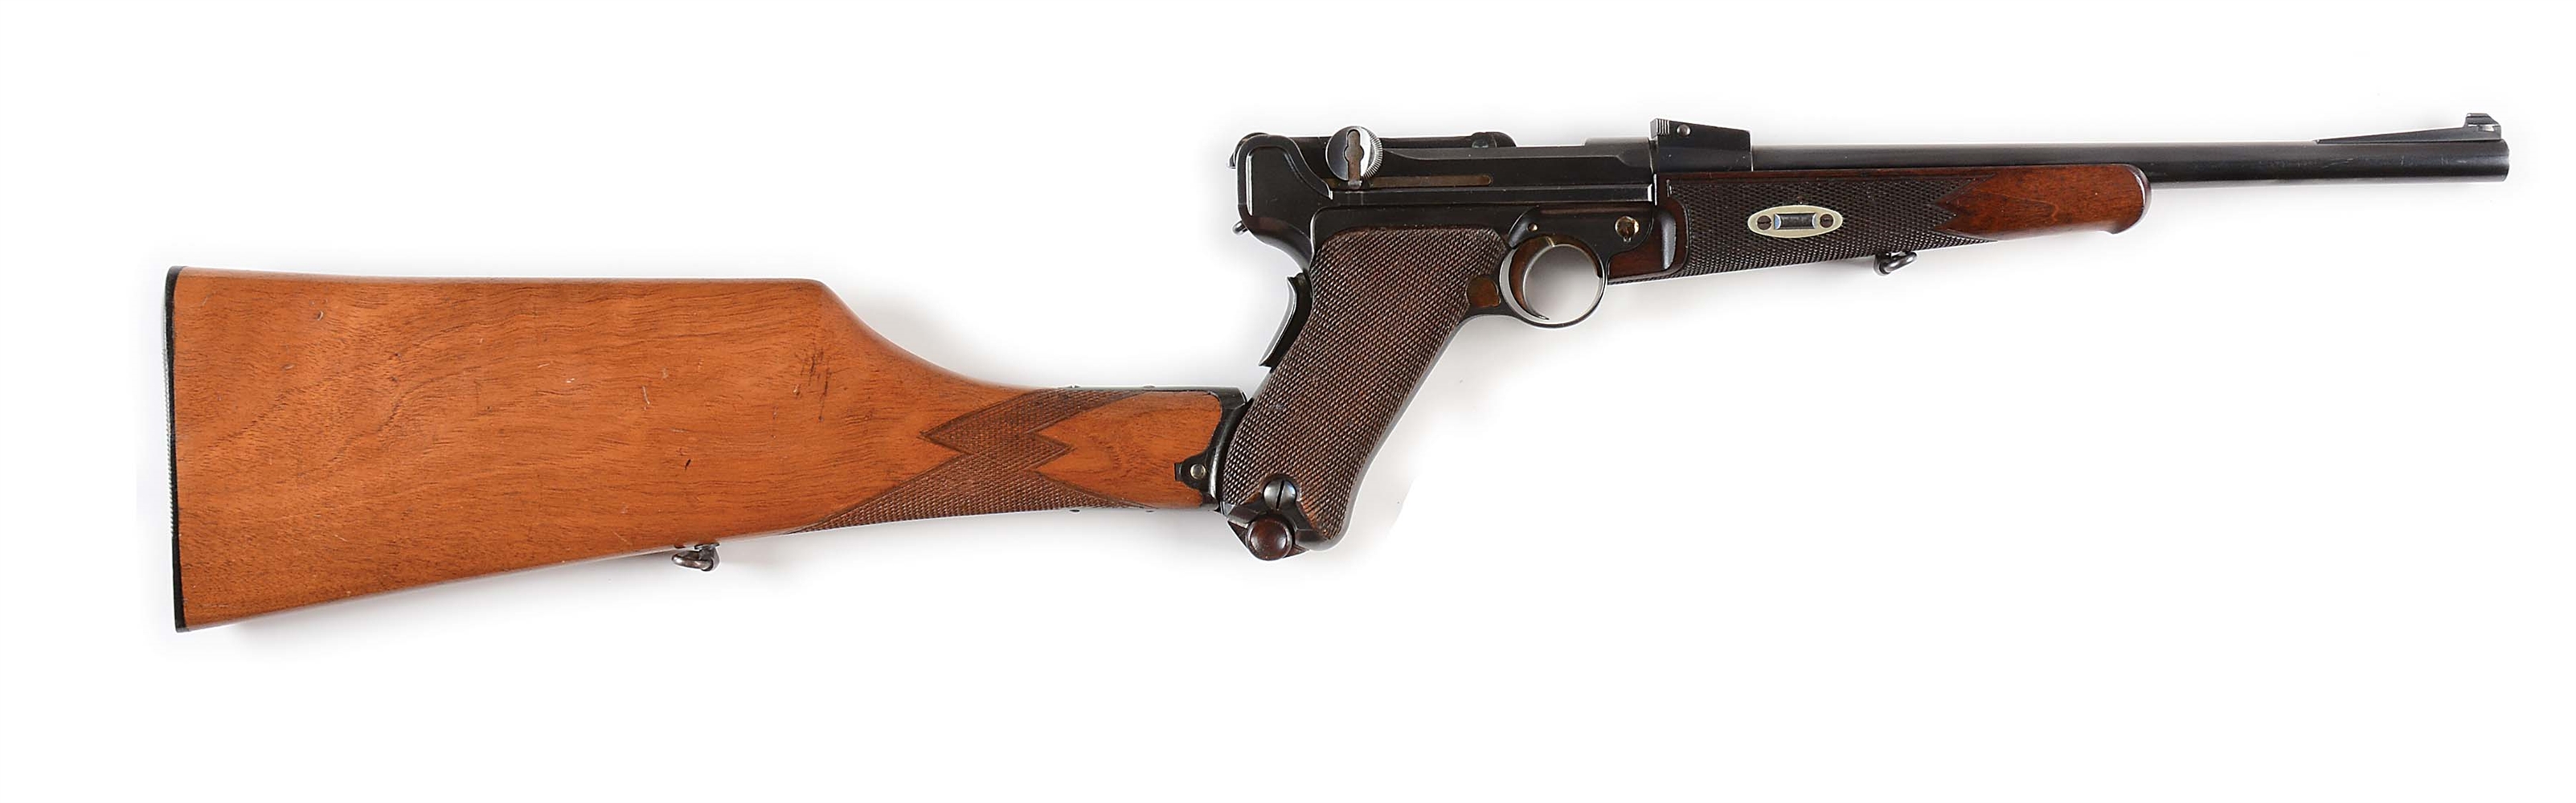 (C) 1902 LUGER CARBINE WITH STOCK.